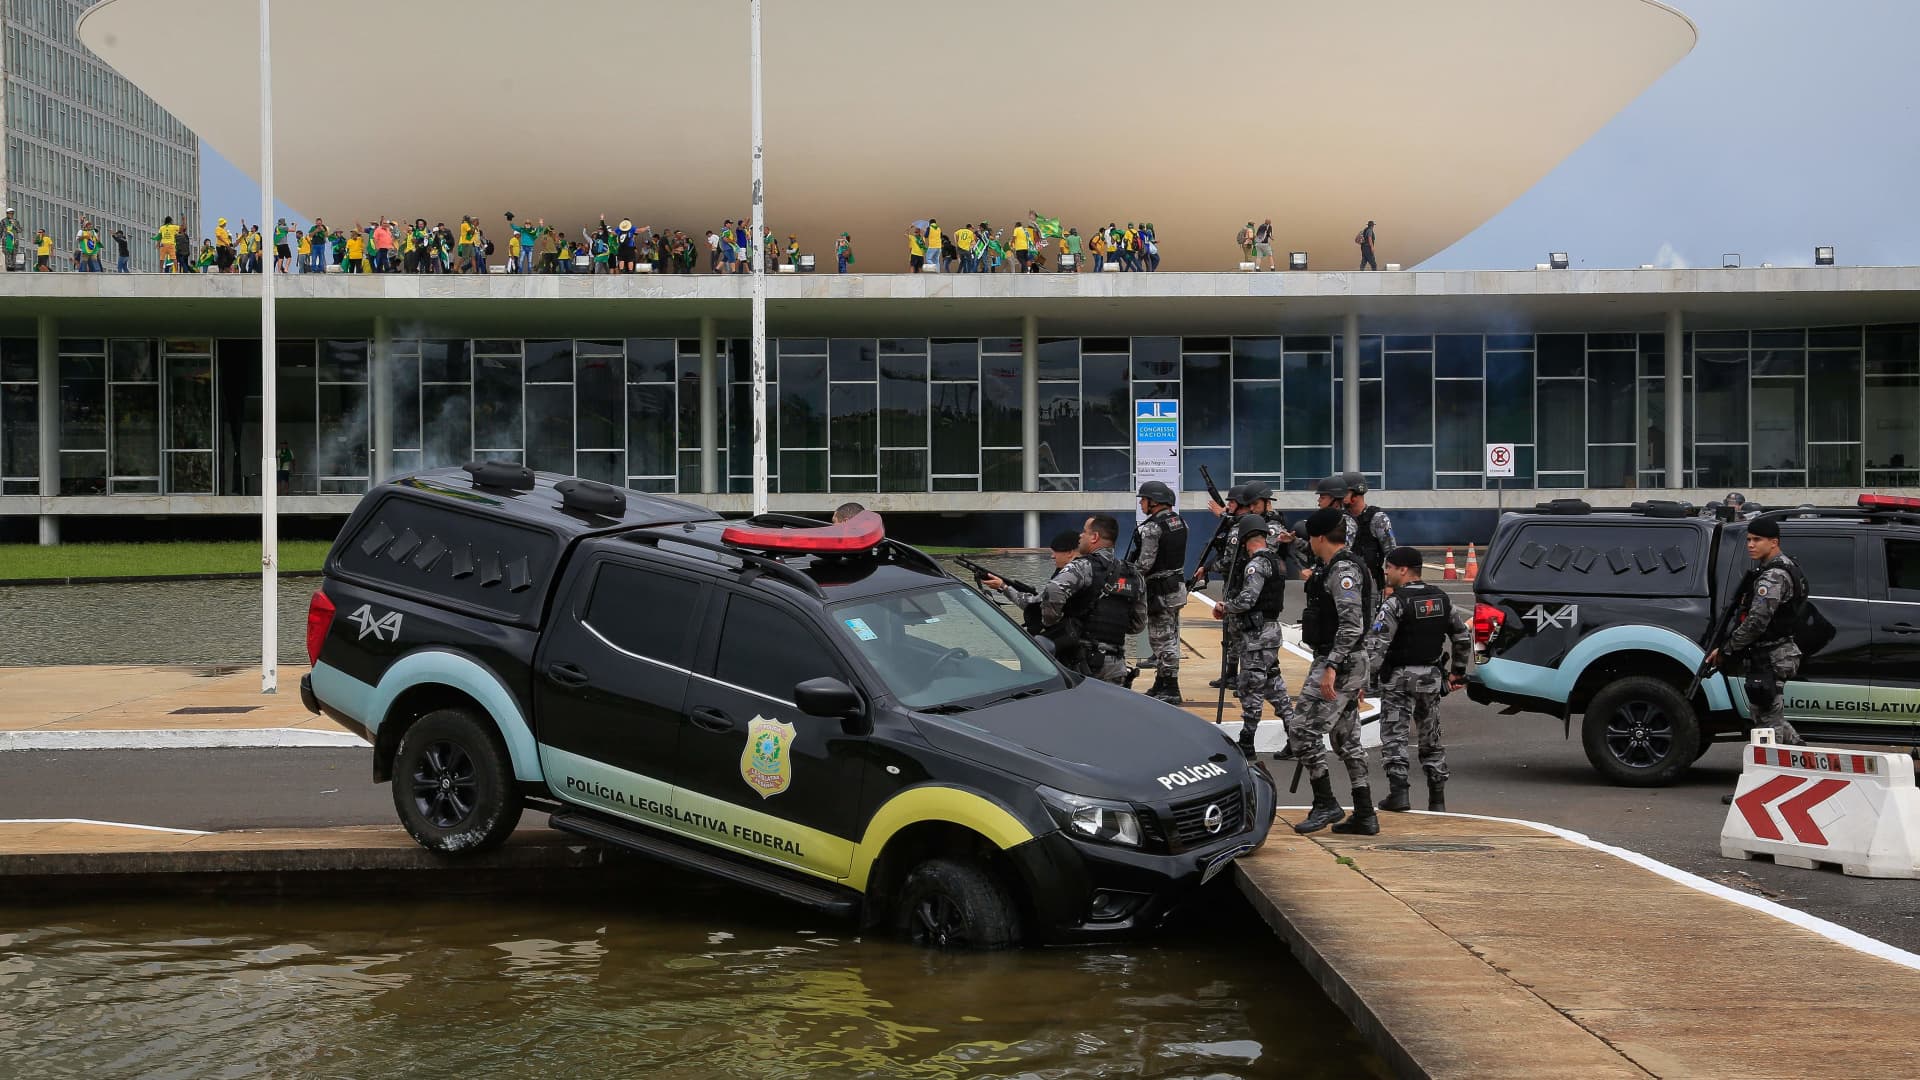 Members of the Federal Legislative Police stand next a vehicle that crashed into a fountain as supporters of Brazilian former President Jair Bolsonaro invade the National Congress in Brasilia on January 8, 2023.